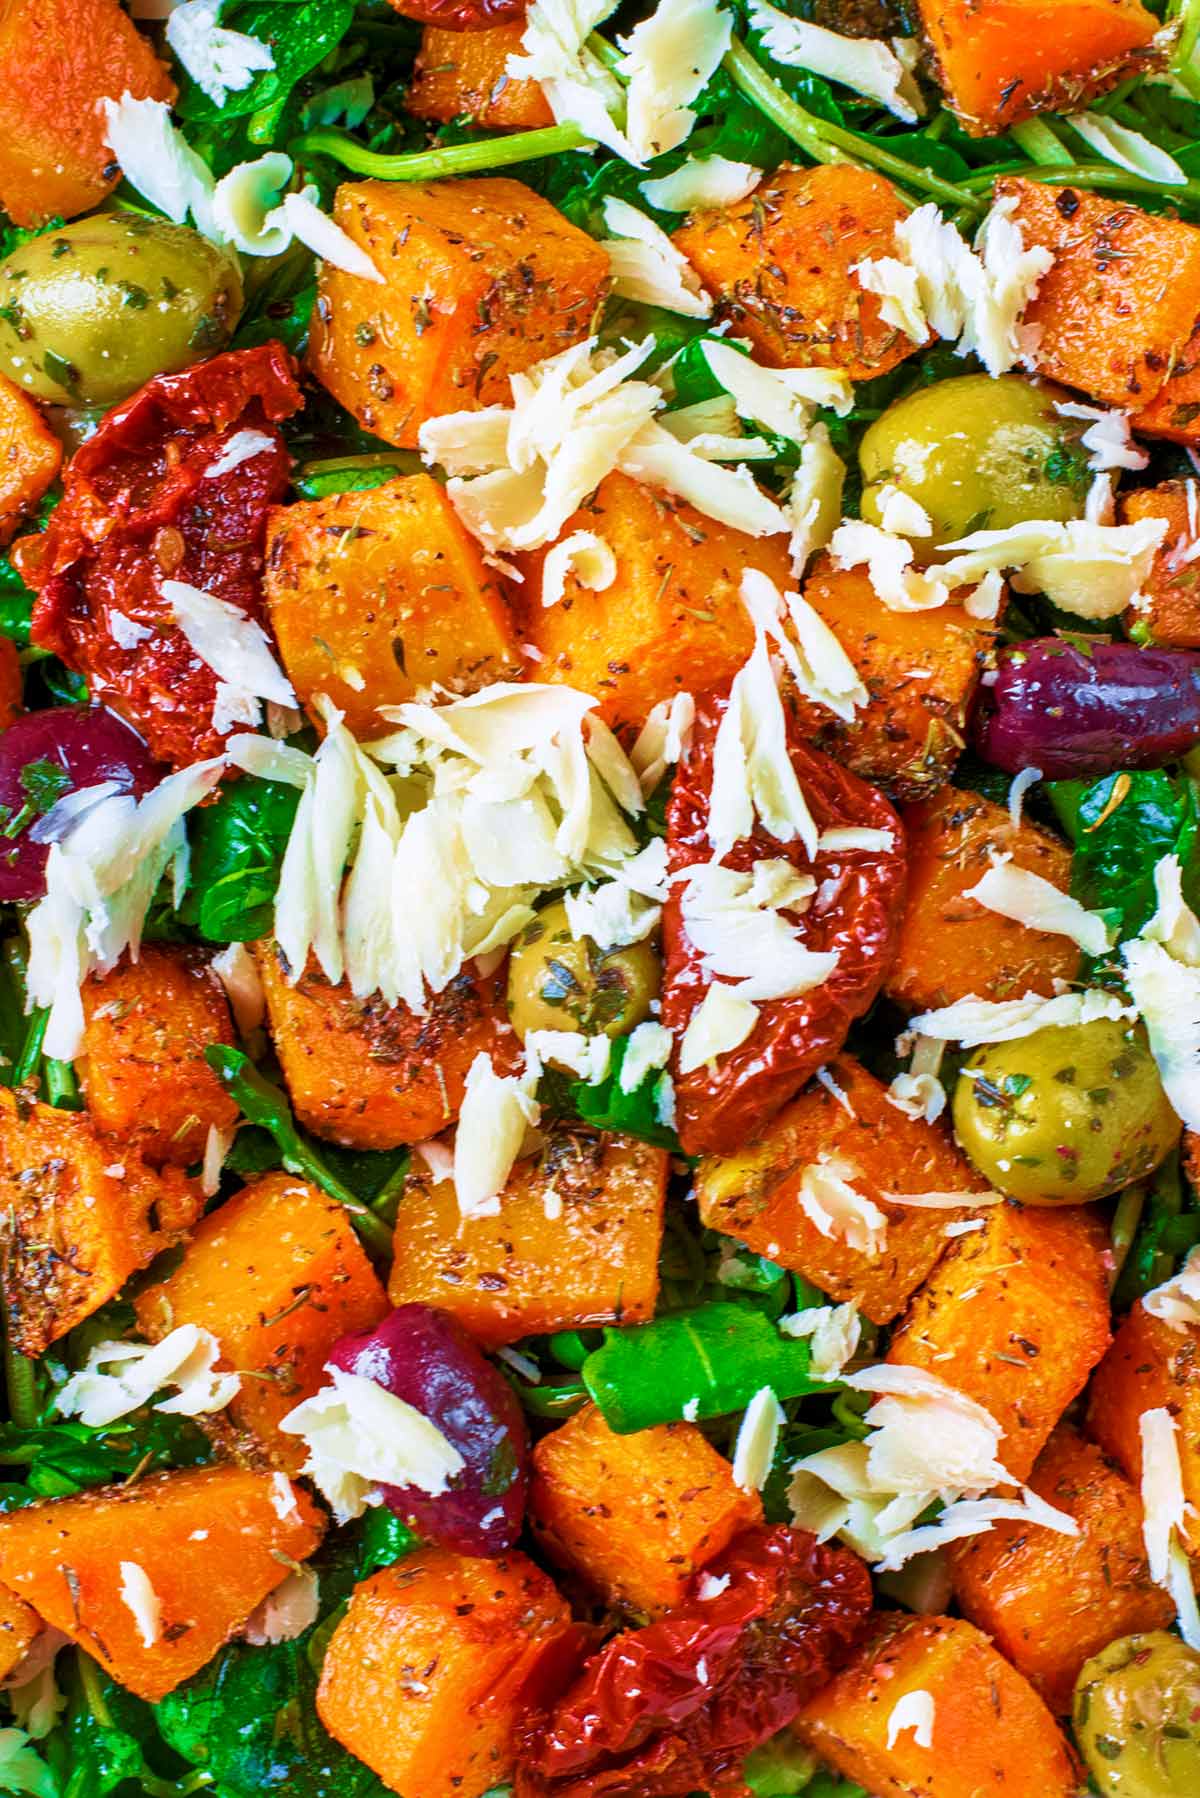 Roasted butternut squash, sundried tomatoes and shavings of cheese on a salad.